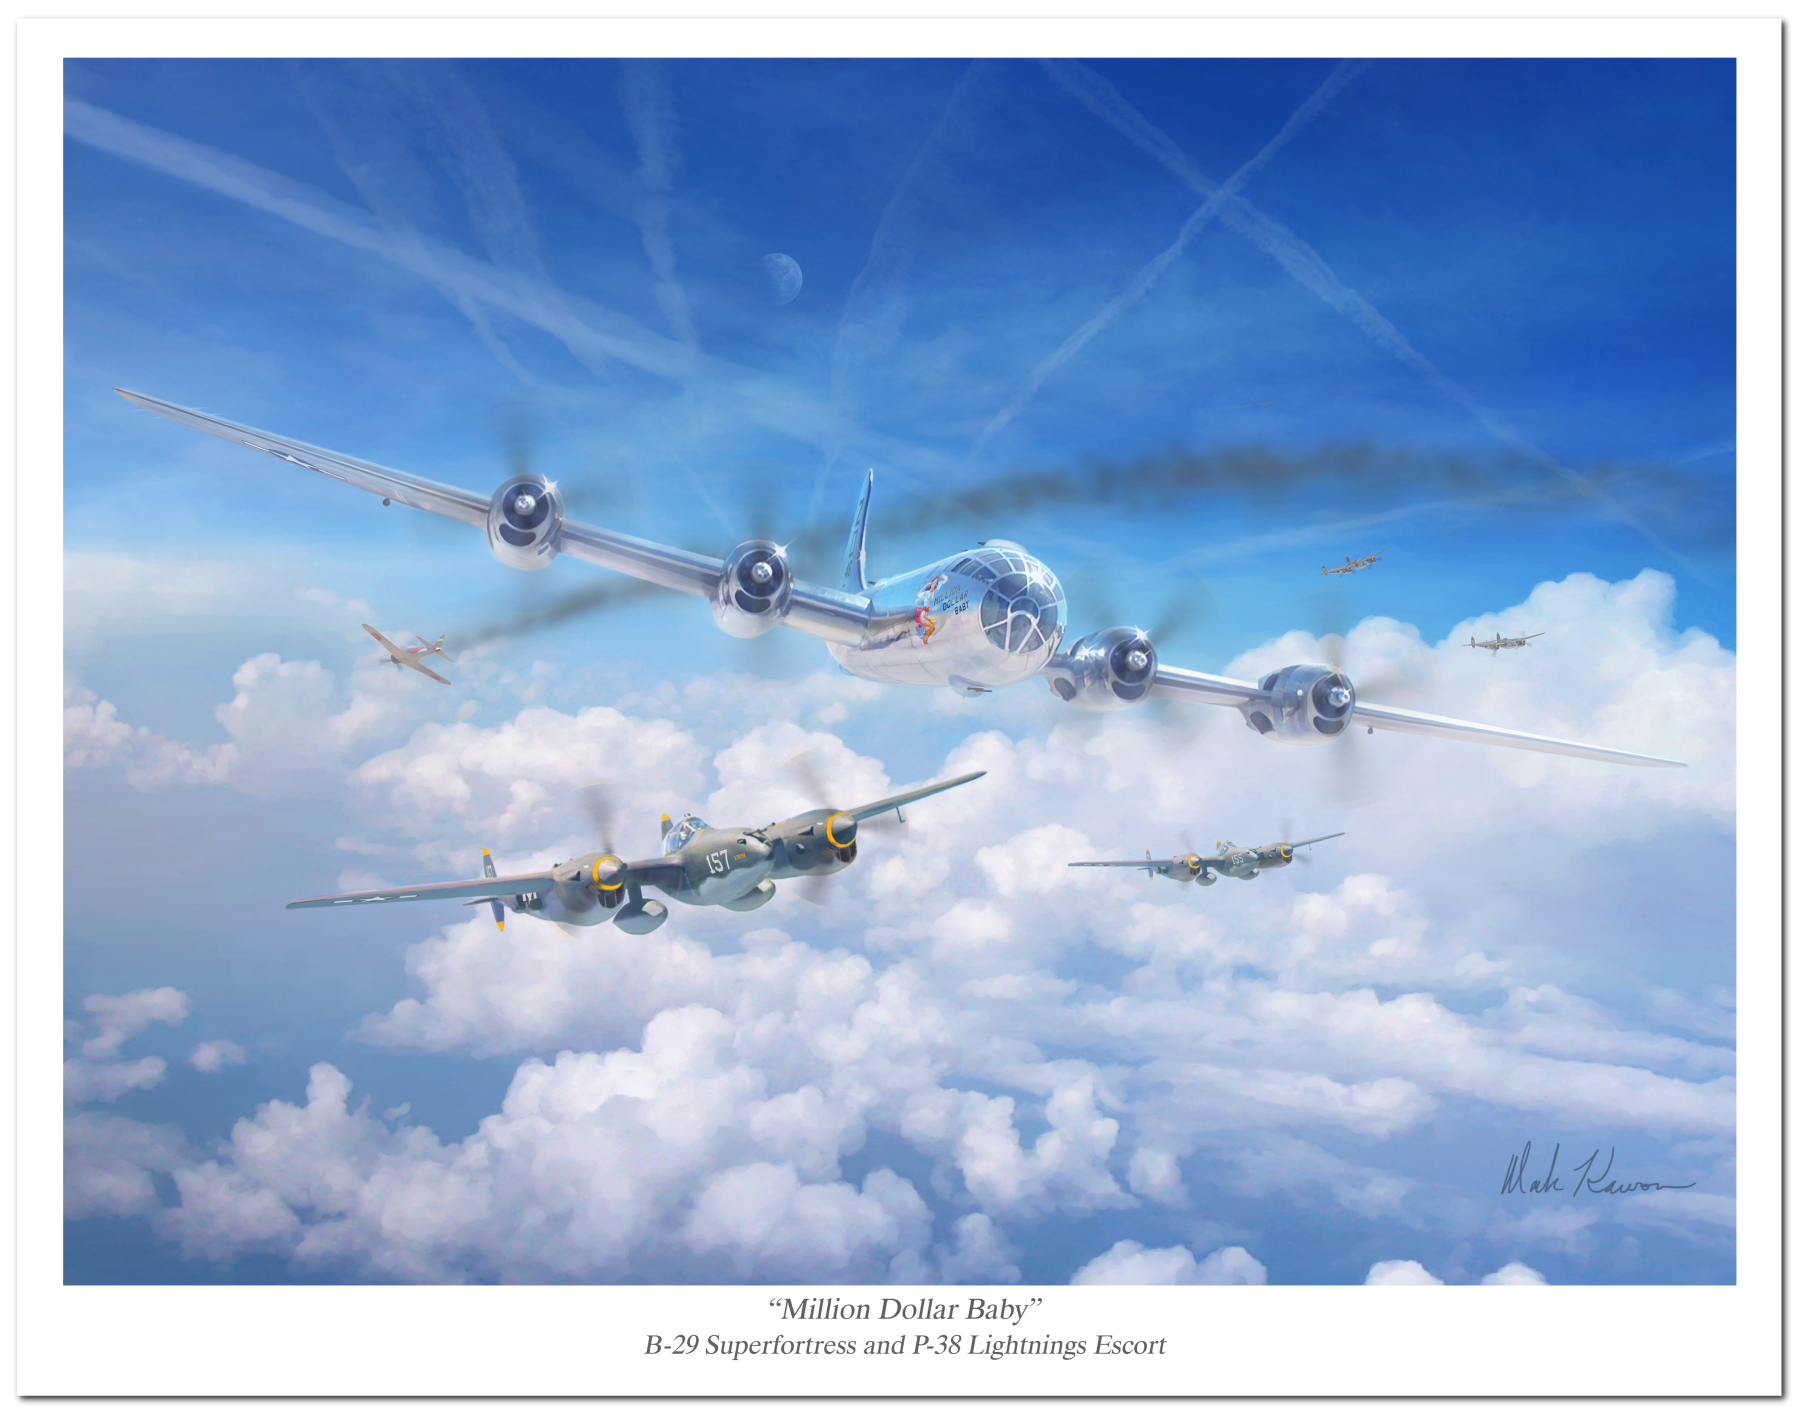 "Million Dollar Baby" by Mark Karvon featuring the USAAF B-29 Flying Fortress